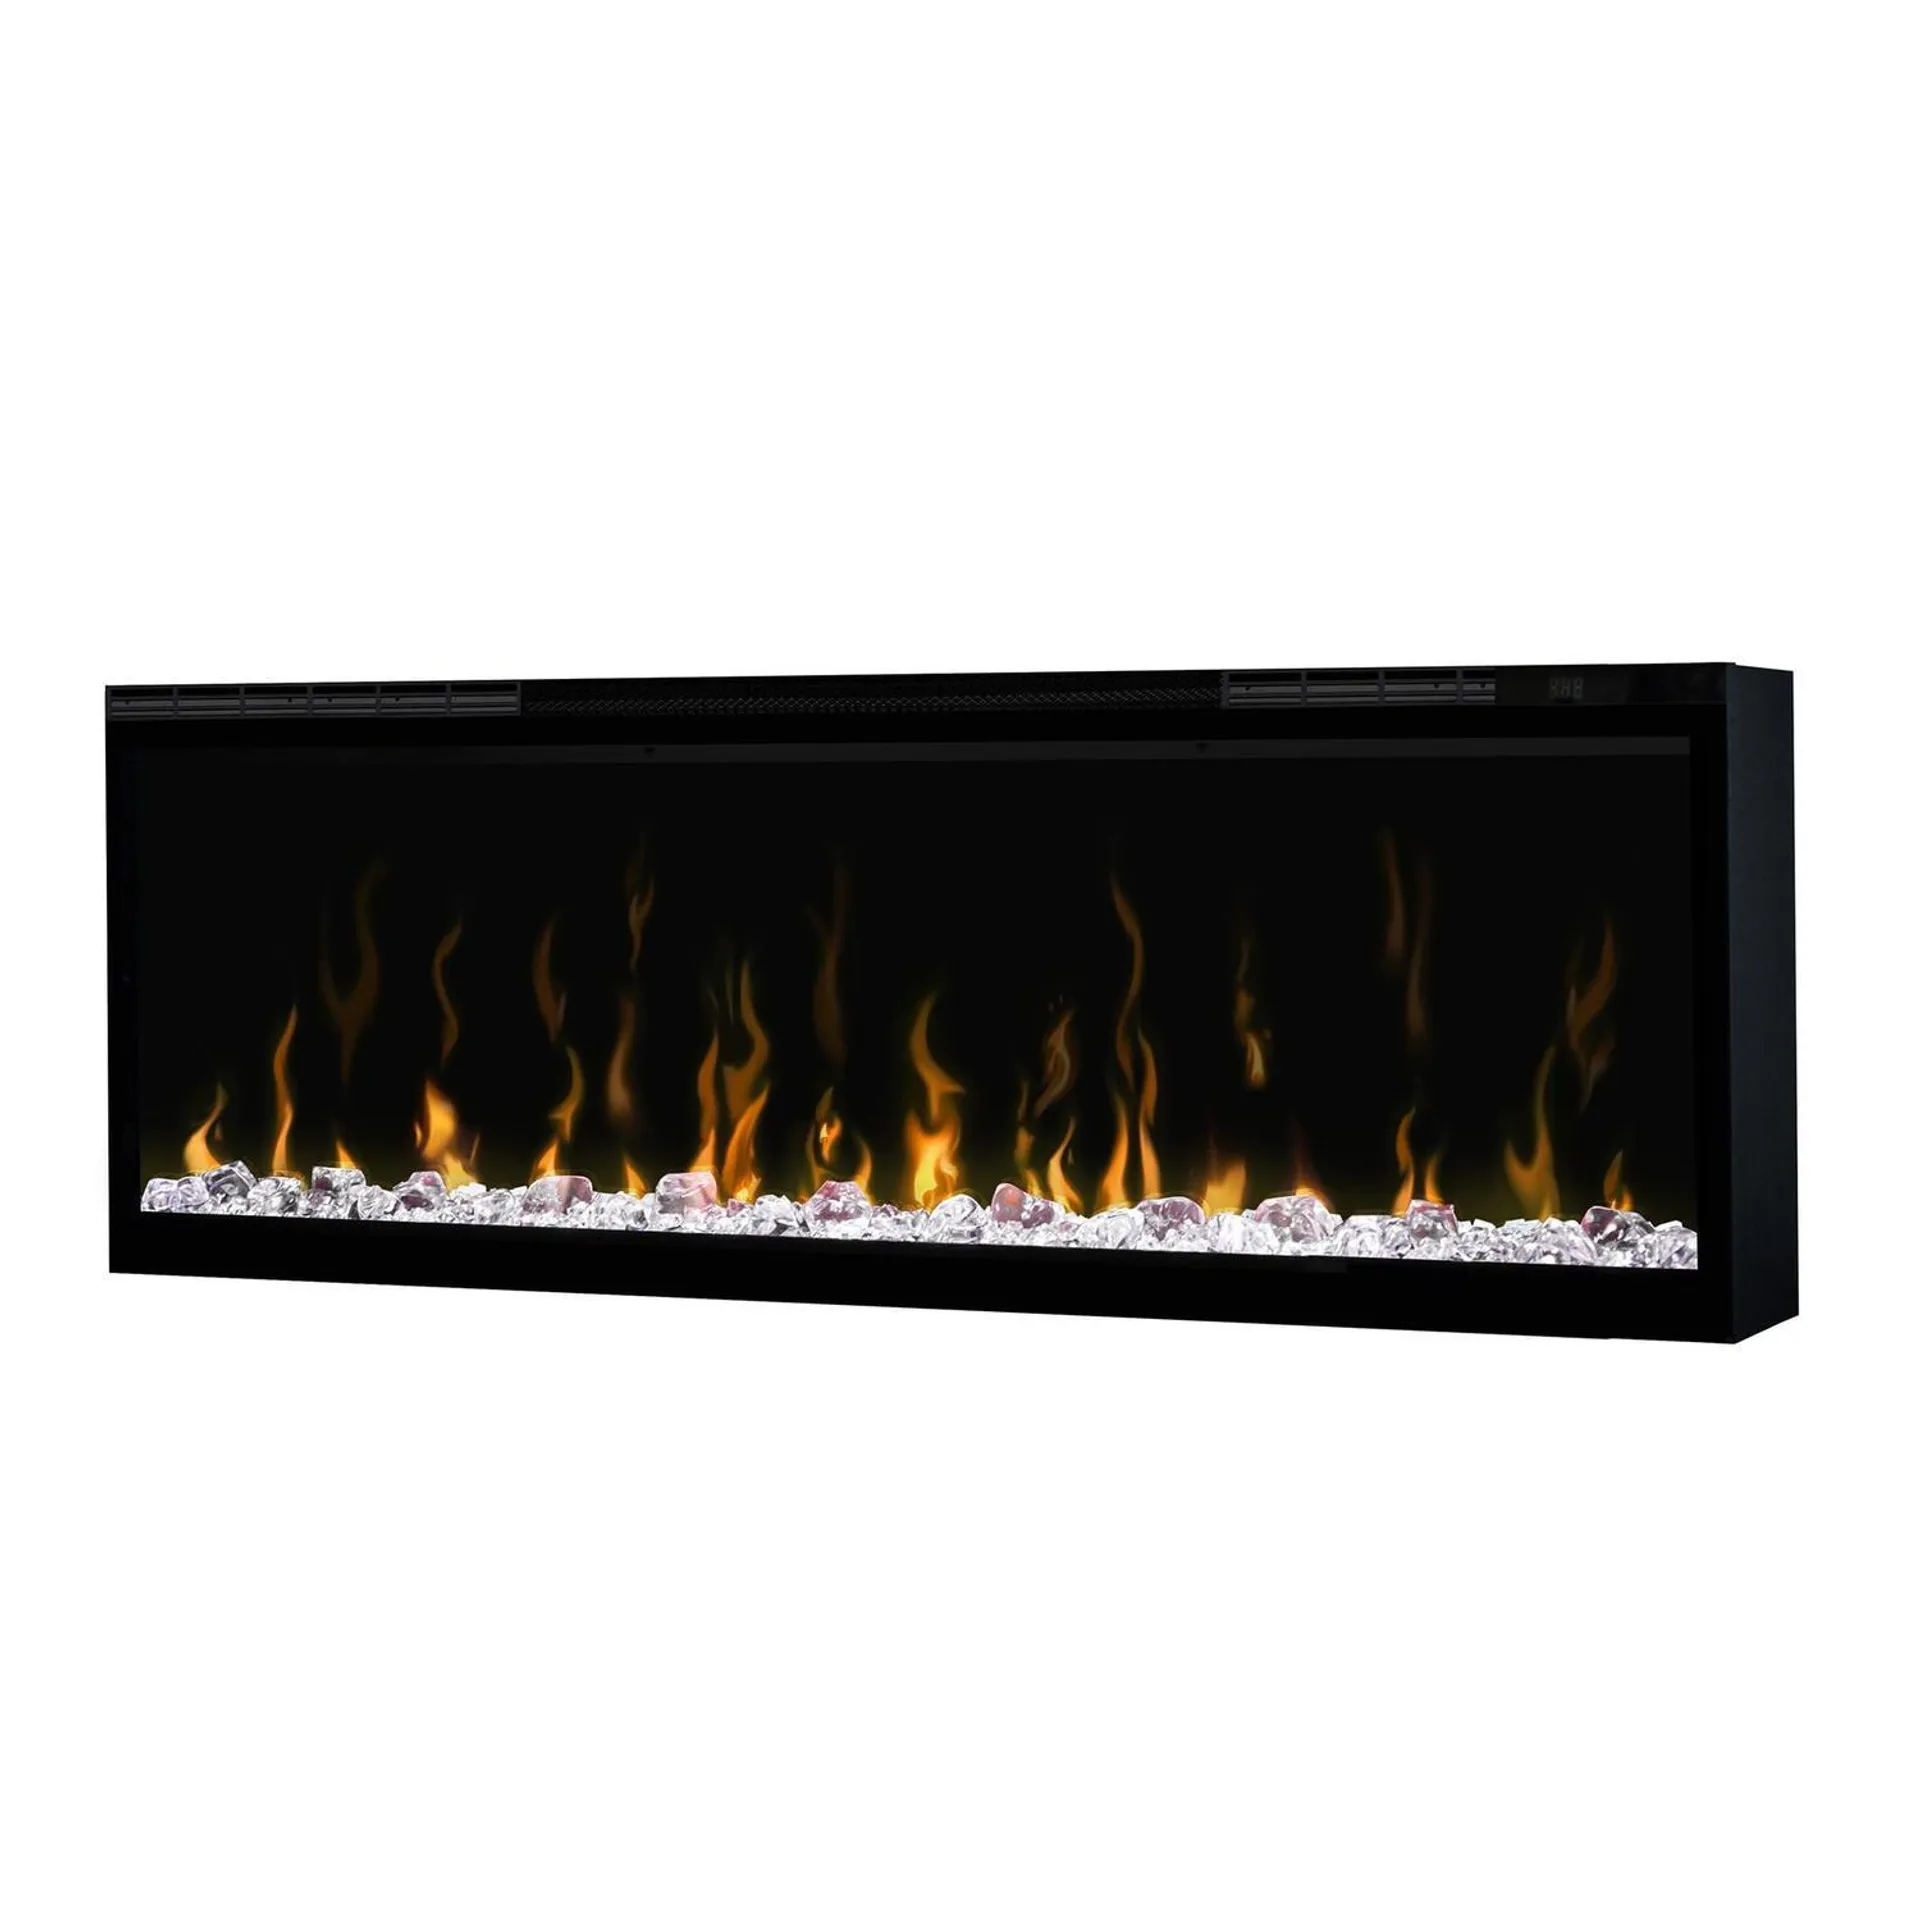 Ignite XL Ignite Wall Mounted Flame Effect Heater 2kW, 1270mm